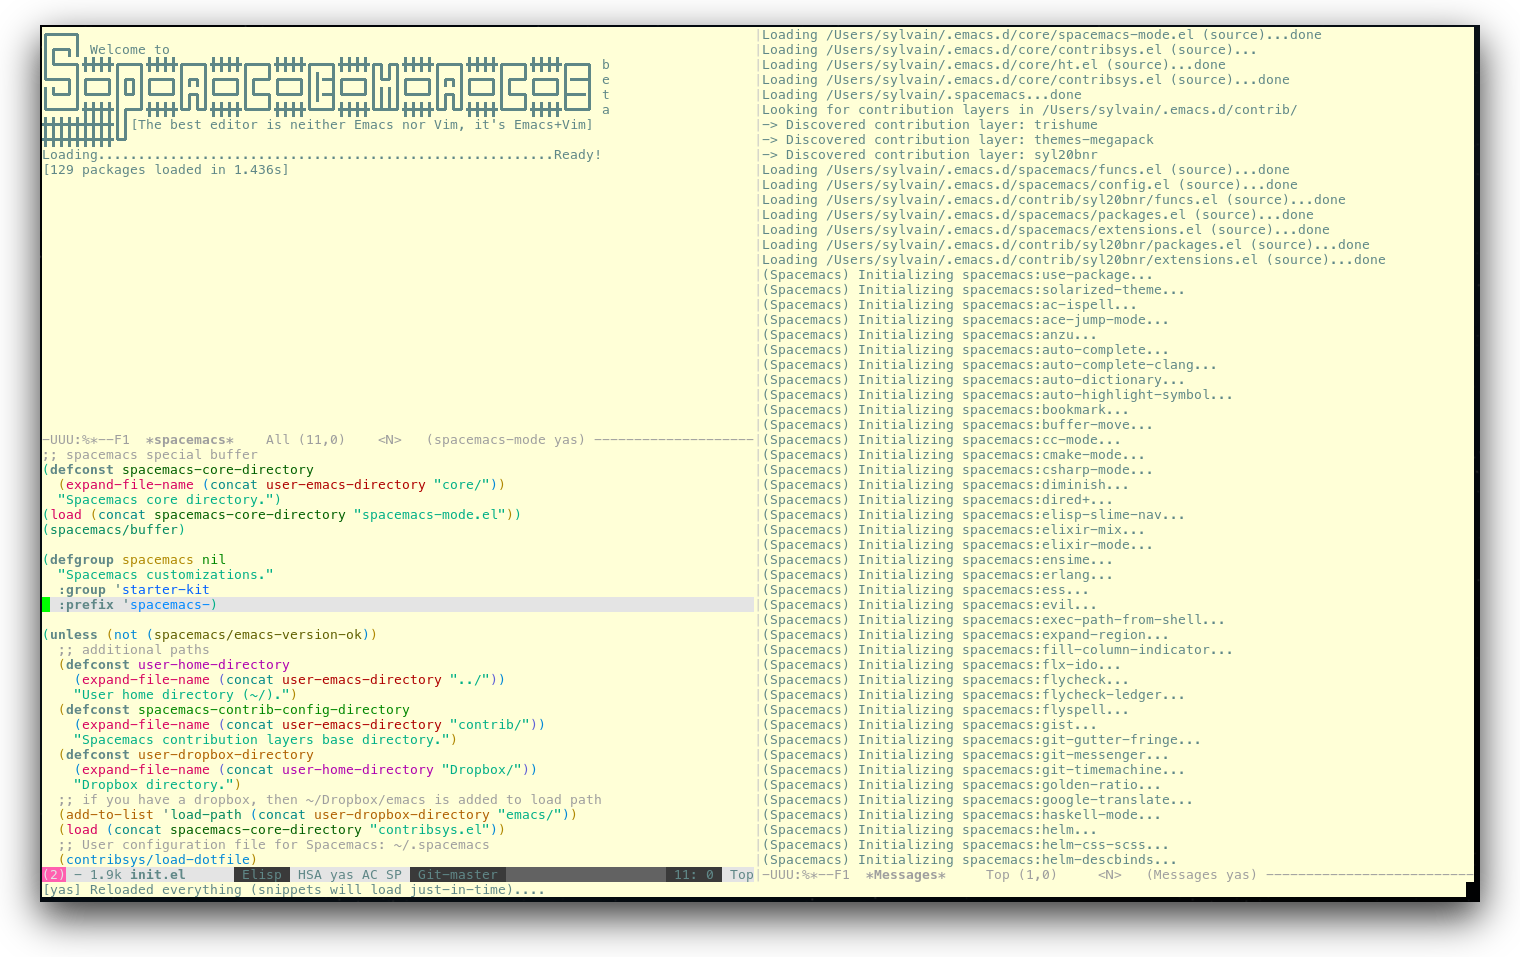 /TakeV/spacemacs/media/commit/23f43af23c48e979781d453a6e1c9b349082dbc1/doc/img/spacemacs-urxvt.png